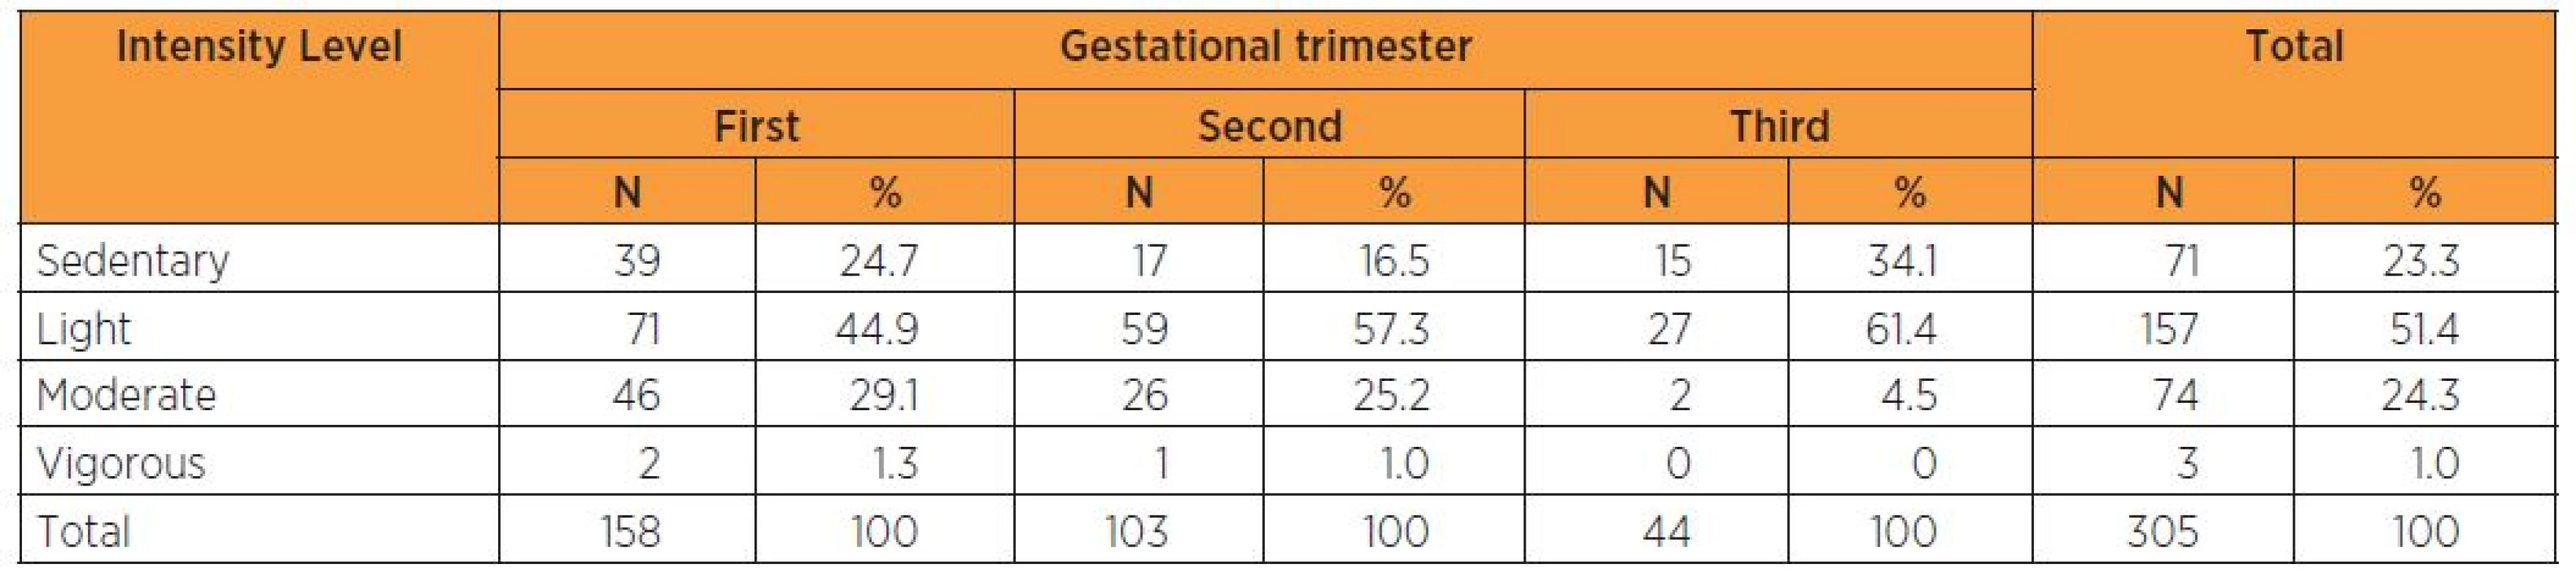 Physical activity intensity level according to the gestational trimester